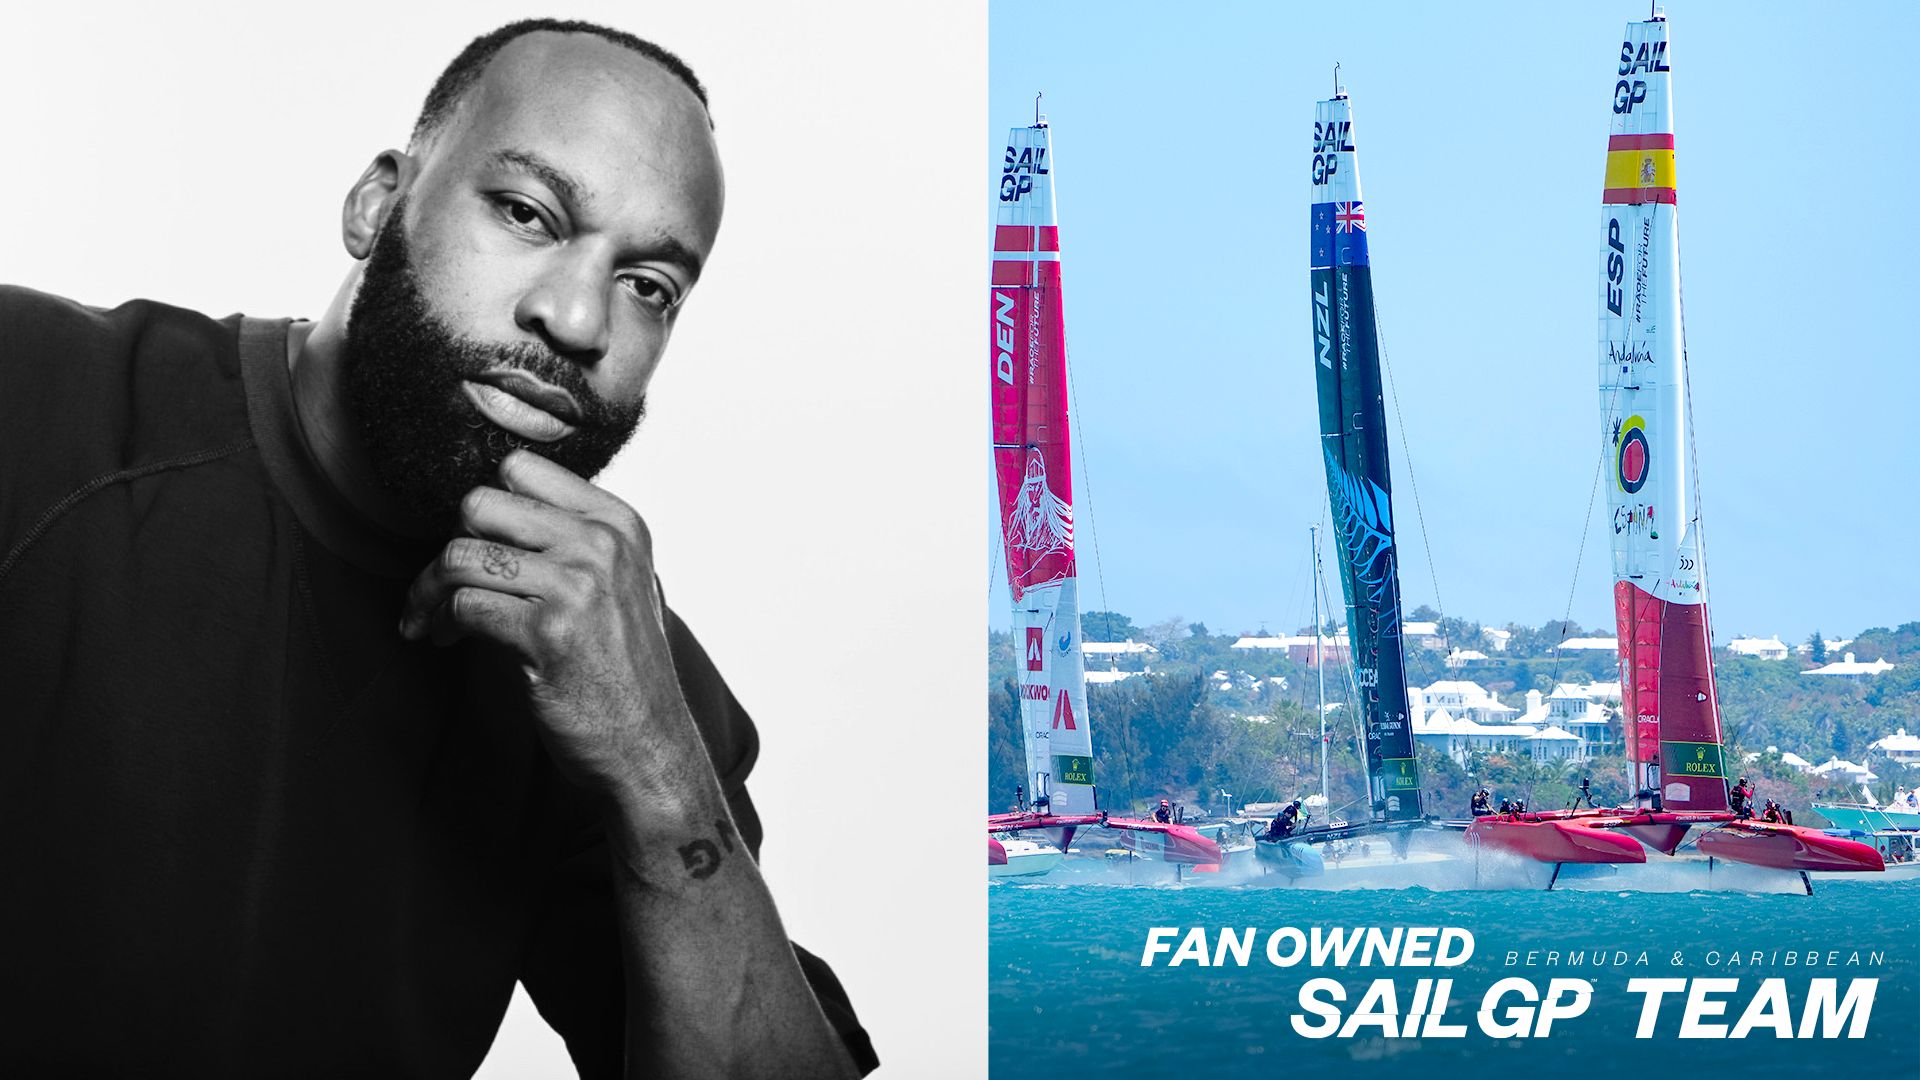 Baron Davis Becomes Investor in SailGP’s Fan-Owned Team